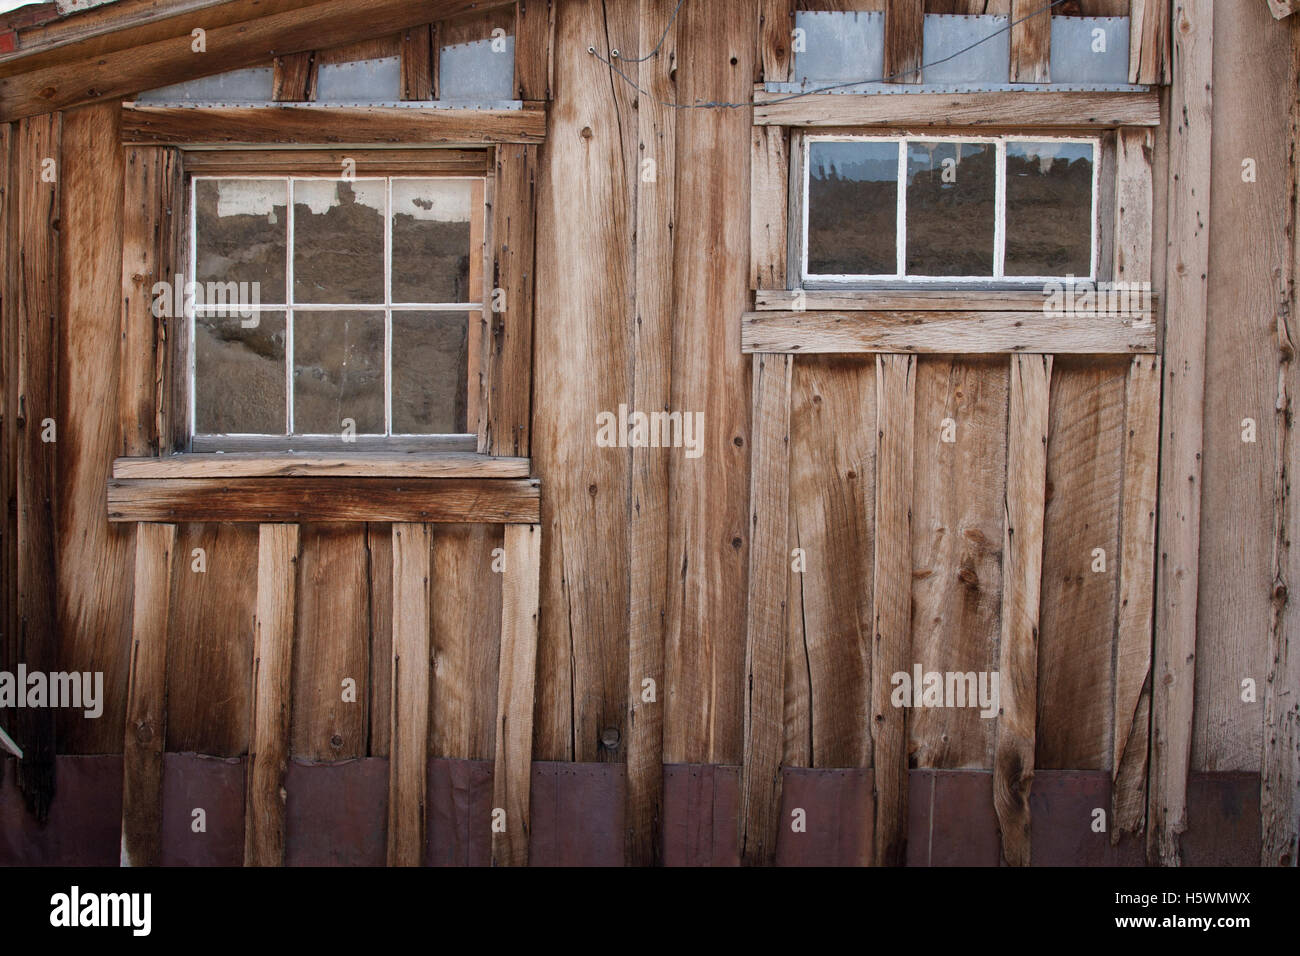 Bodie, California, a ghost town that was once a booming mining town. Stock Photo